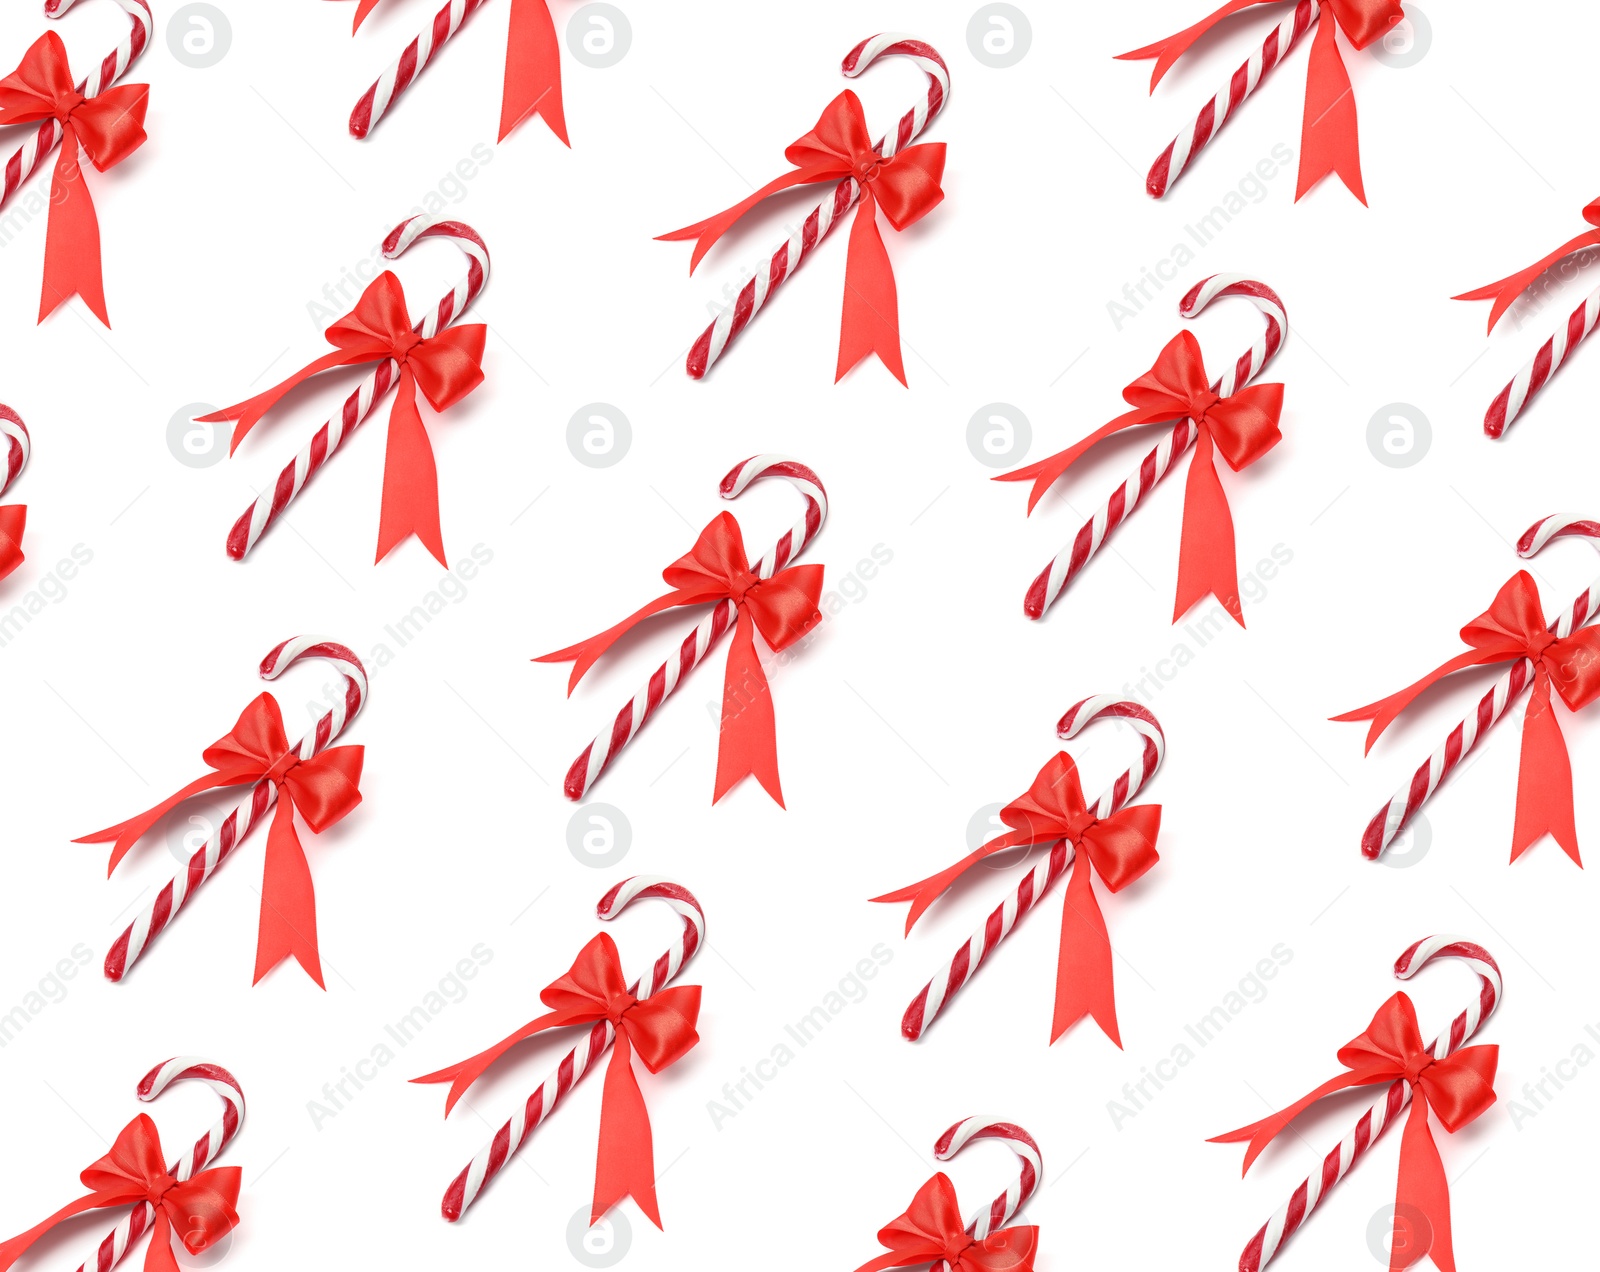 Image of Tasty Christmas candy canes on white background. Pattern design